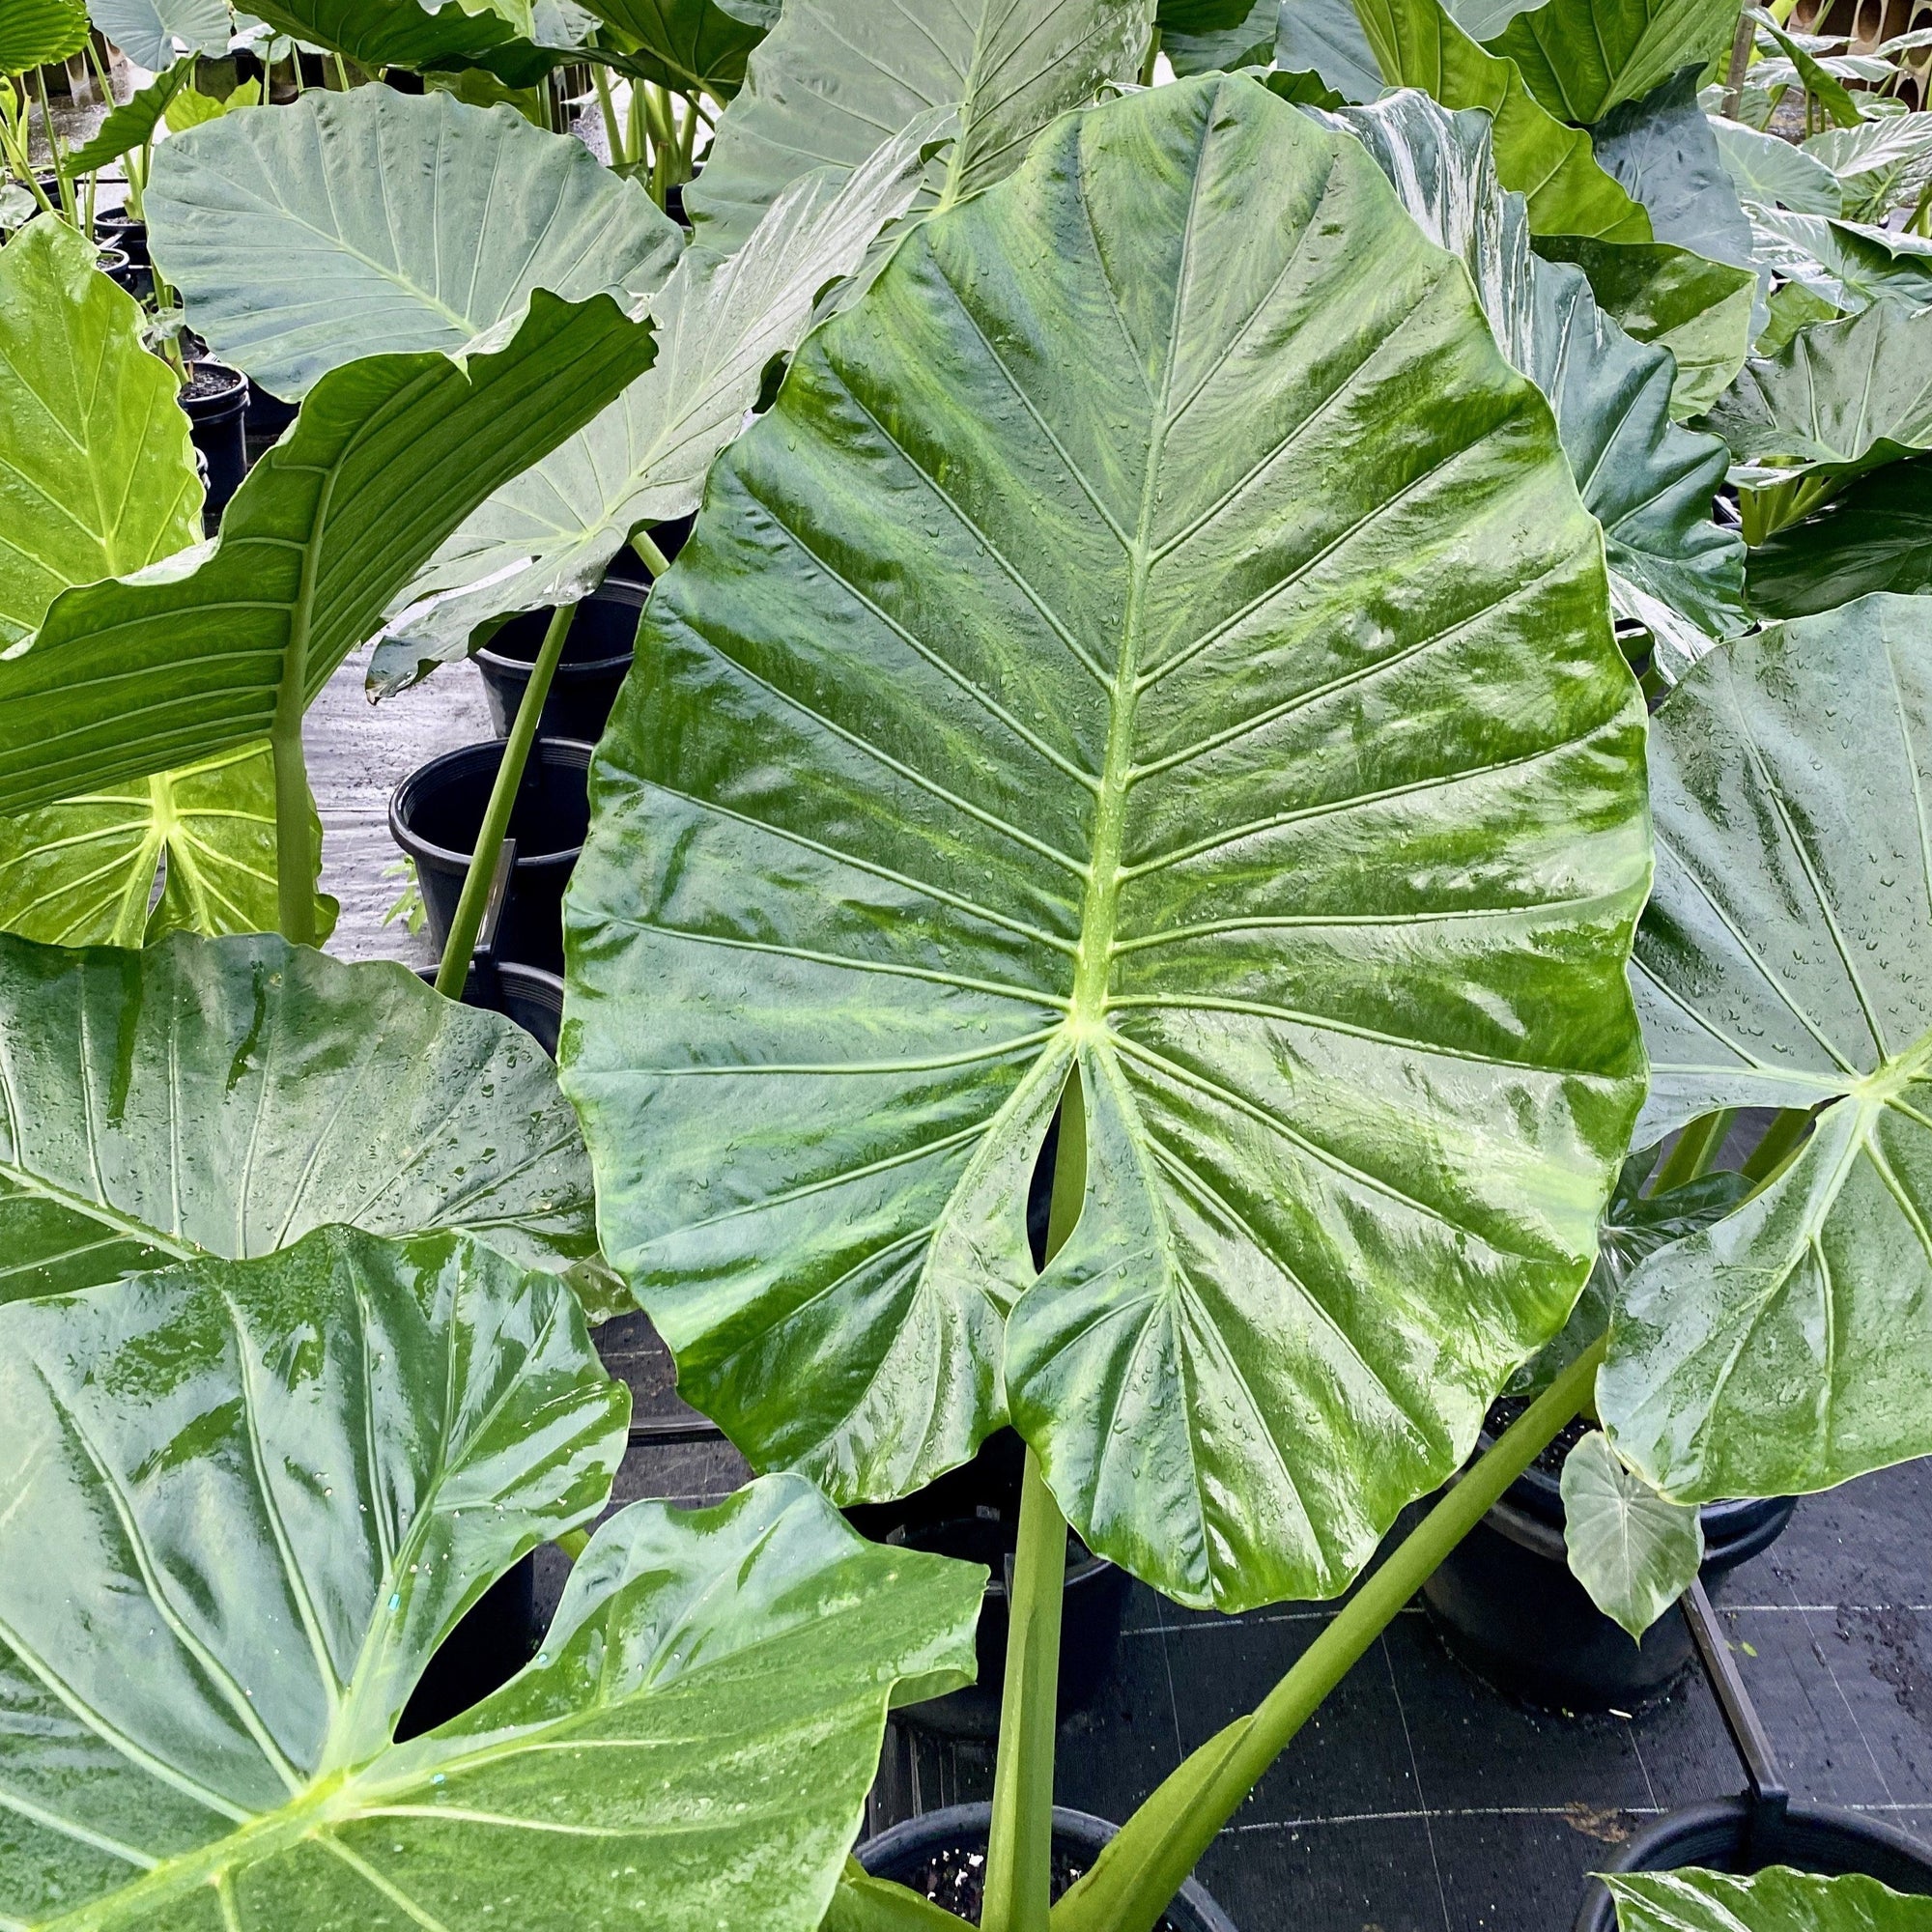 Tropical rainforest foliage plant with very large green upright arrow-shaped leaves